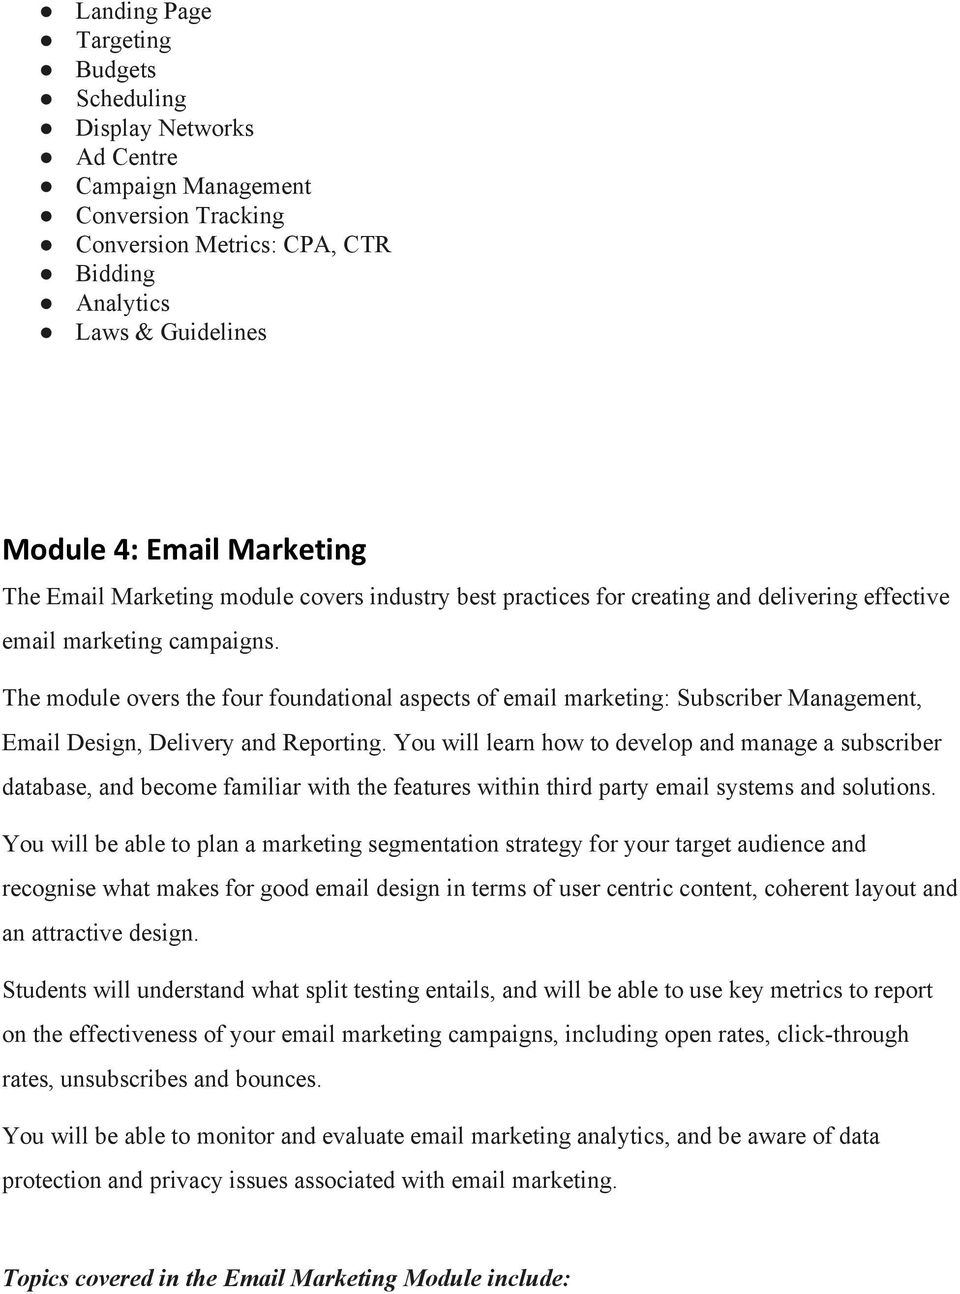 The module overs the four foundational aspects of email marketing: Subscriber Management, Email Design, Delivery and Reporting.